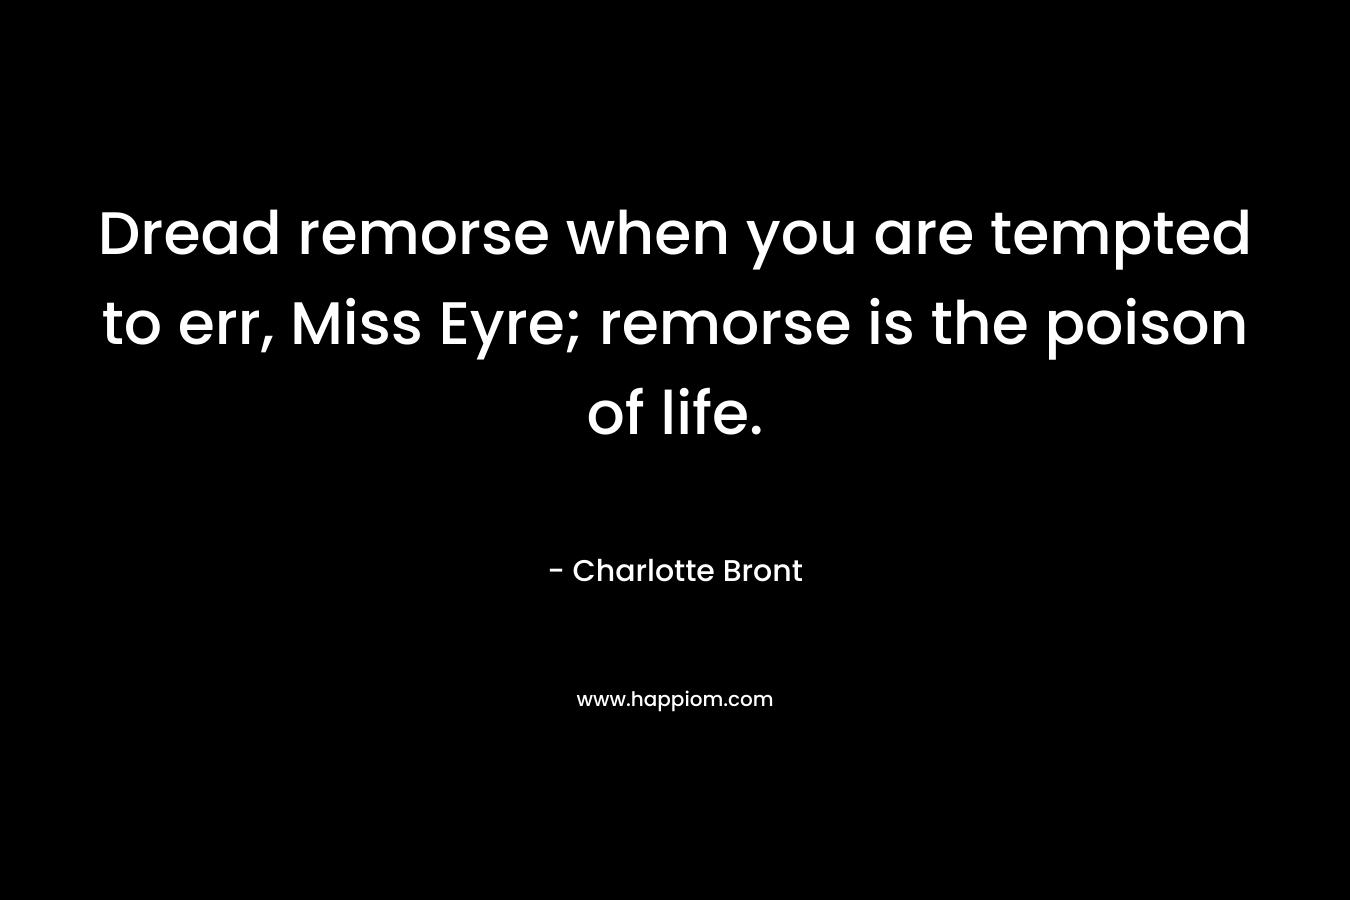 Dread remorse when you are tempted to err, Miss Eyre; remorse is the poison of life.